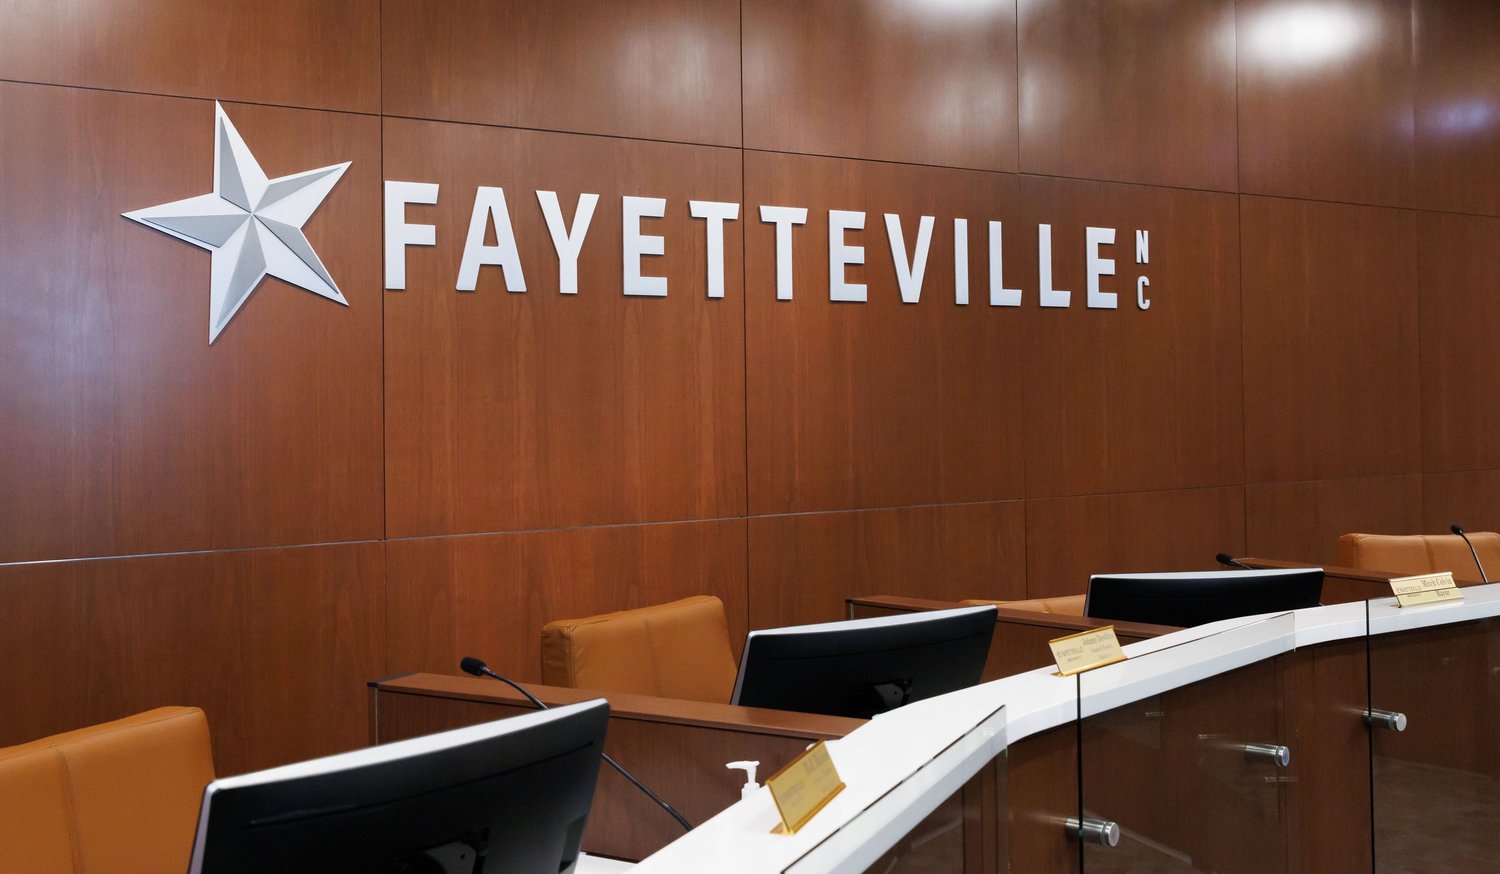 The Fayetteville City Council recently approved appointments to city boards and commissions.